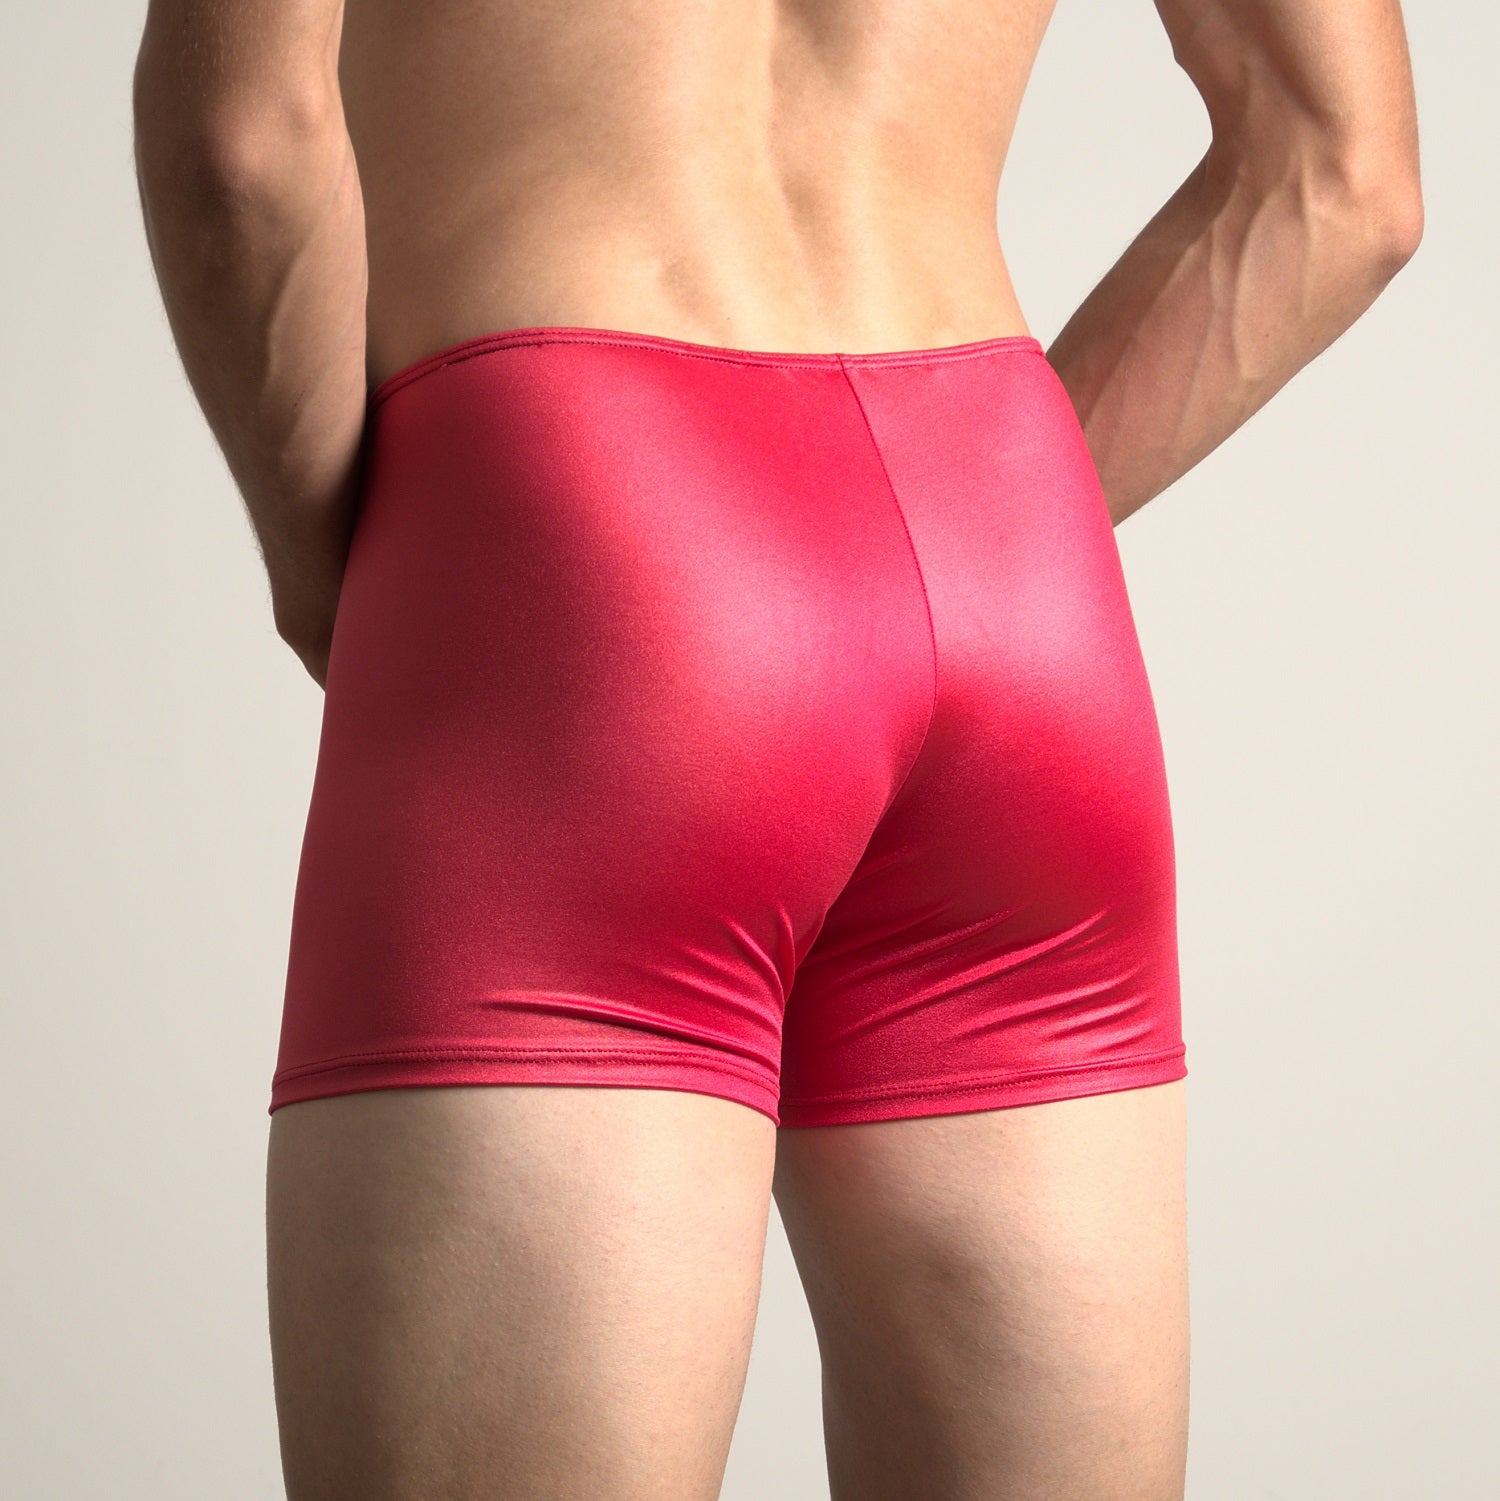 The Etseo Reflex Boxer Brief Red is part of the Etseo Reflex Men's Underwear Collection of Boxer Briefs and Bikini Tangas. Etseo Reflex is an elegant and comfortable collection of products made of a glossy elastic fabric that allows a good fit to the body. At Etseo we manufacture quality men's underwear.